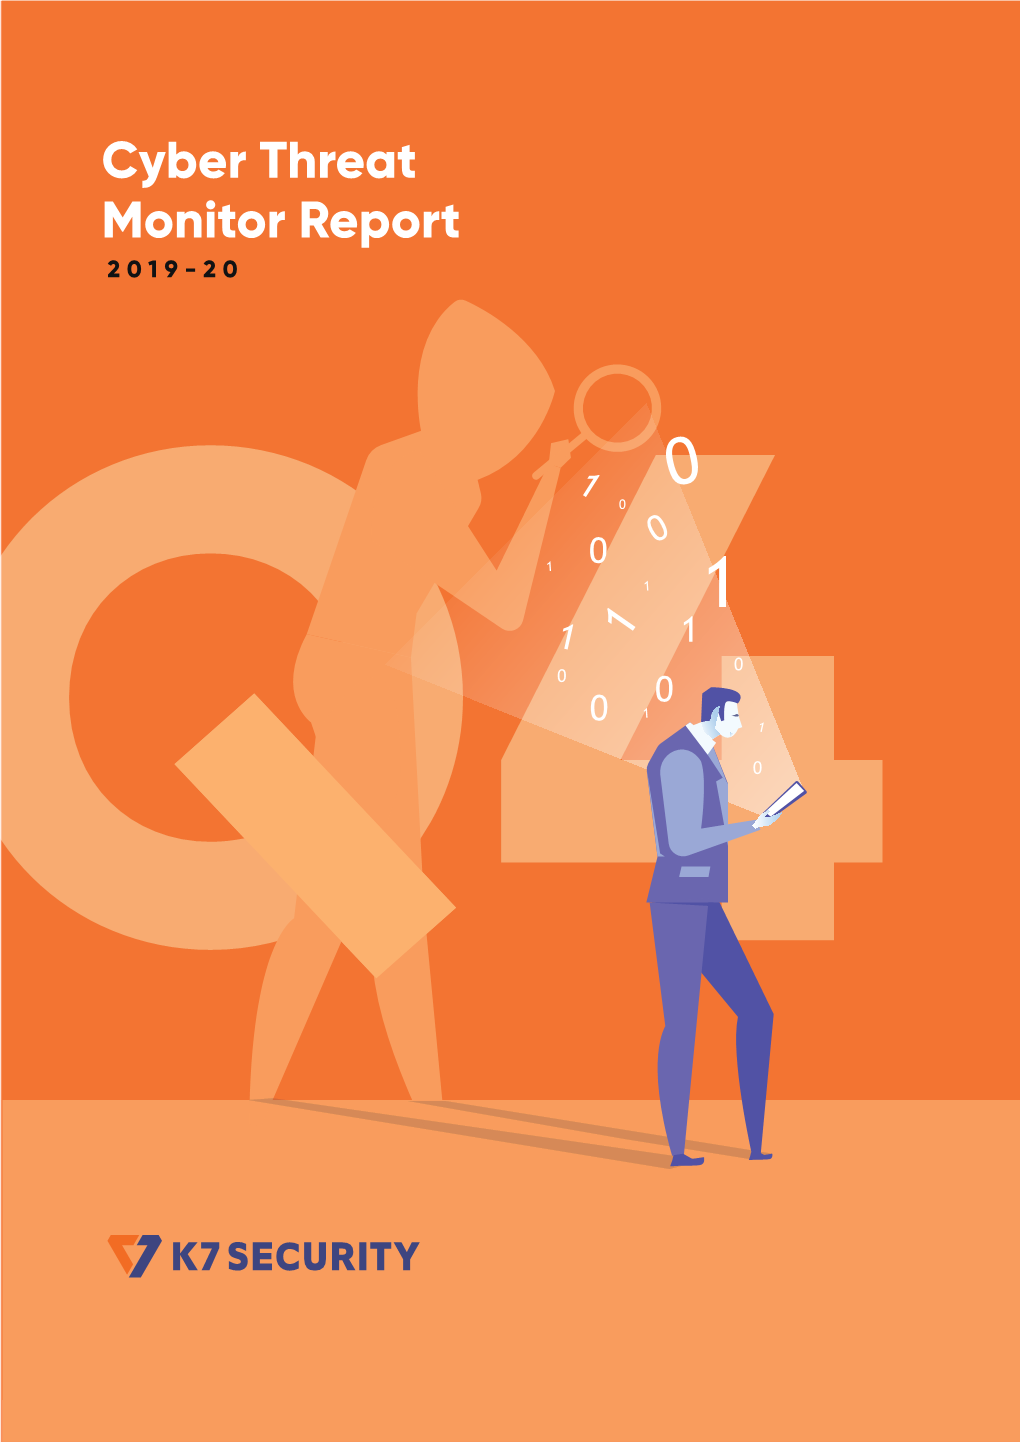 Cyber Threat Monitor Report 2019-20